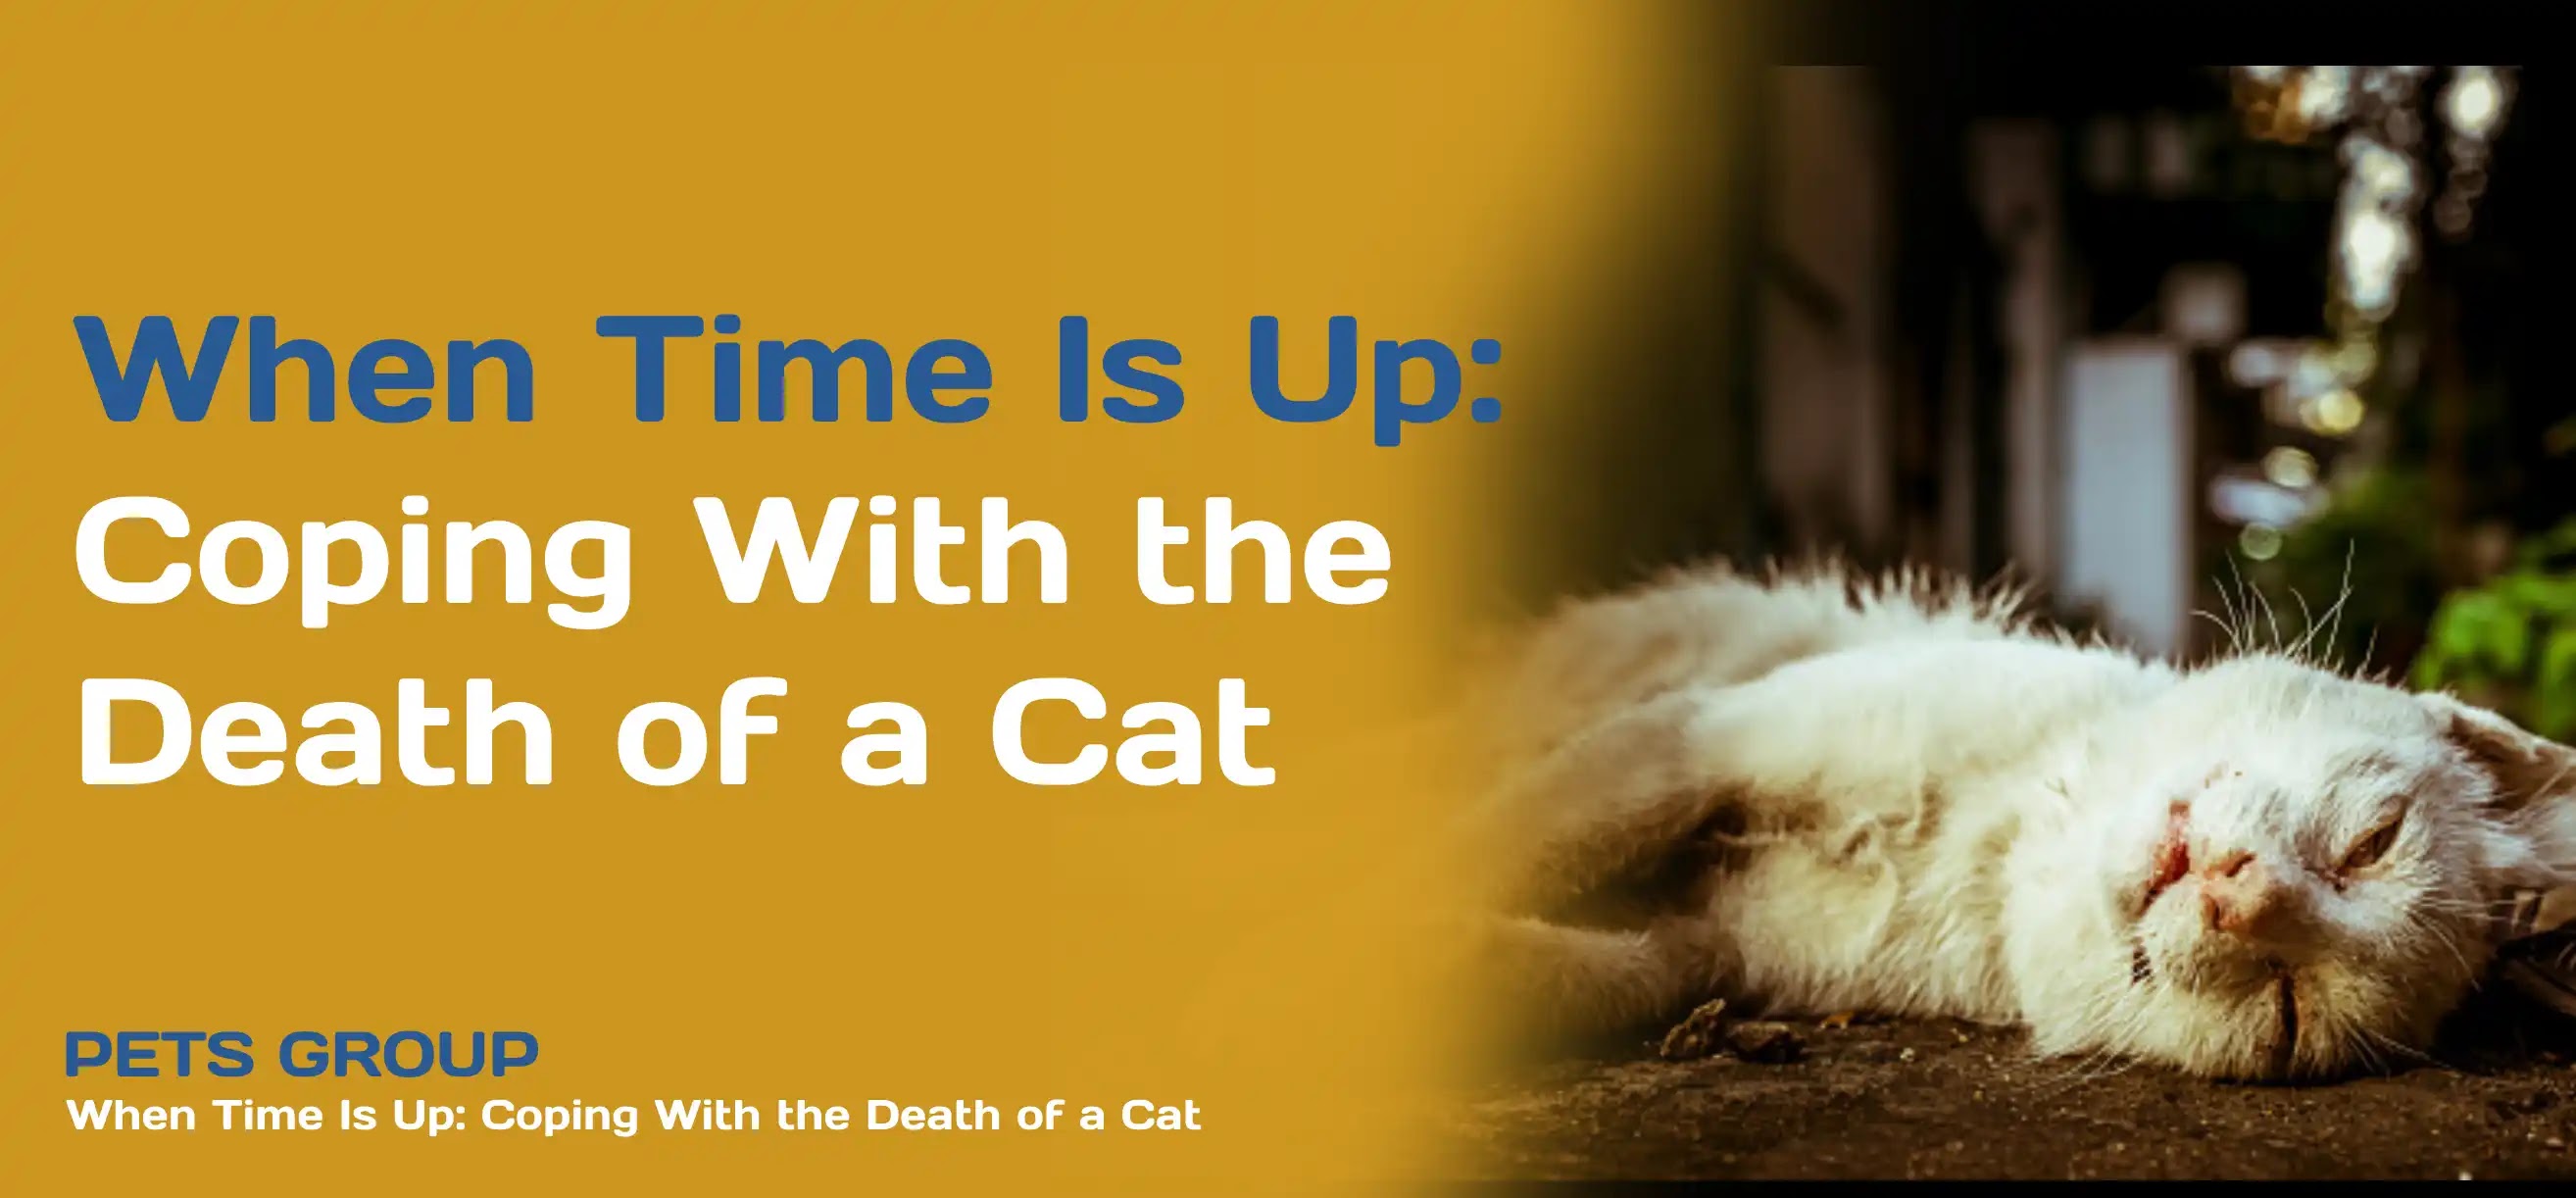 When Time Is Up: Coping With the Death of a Cat